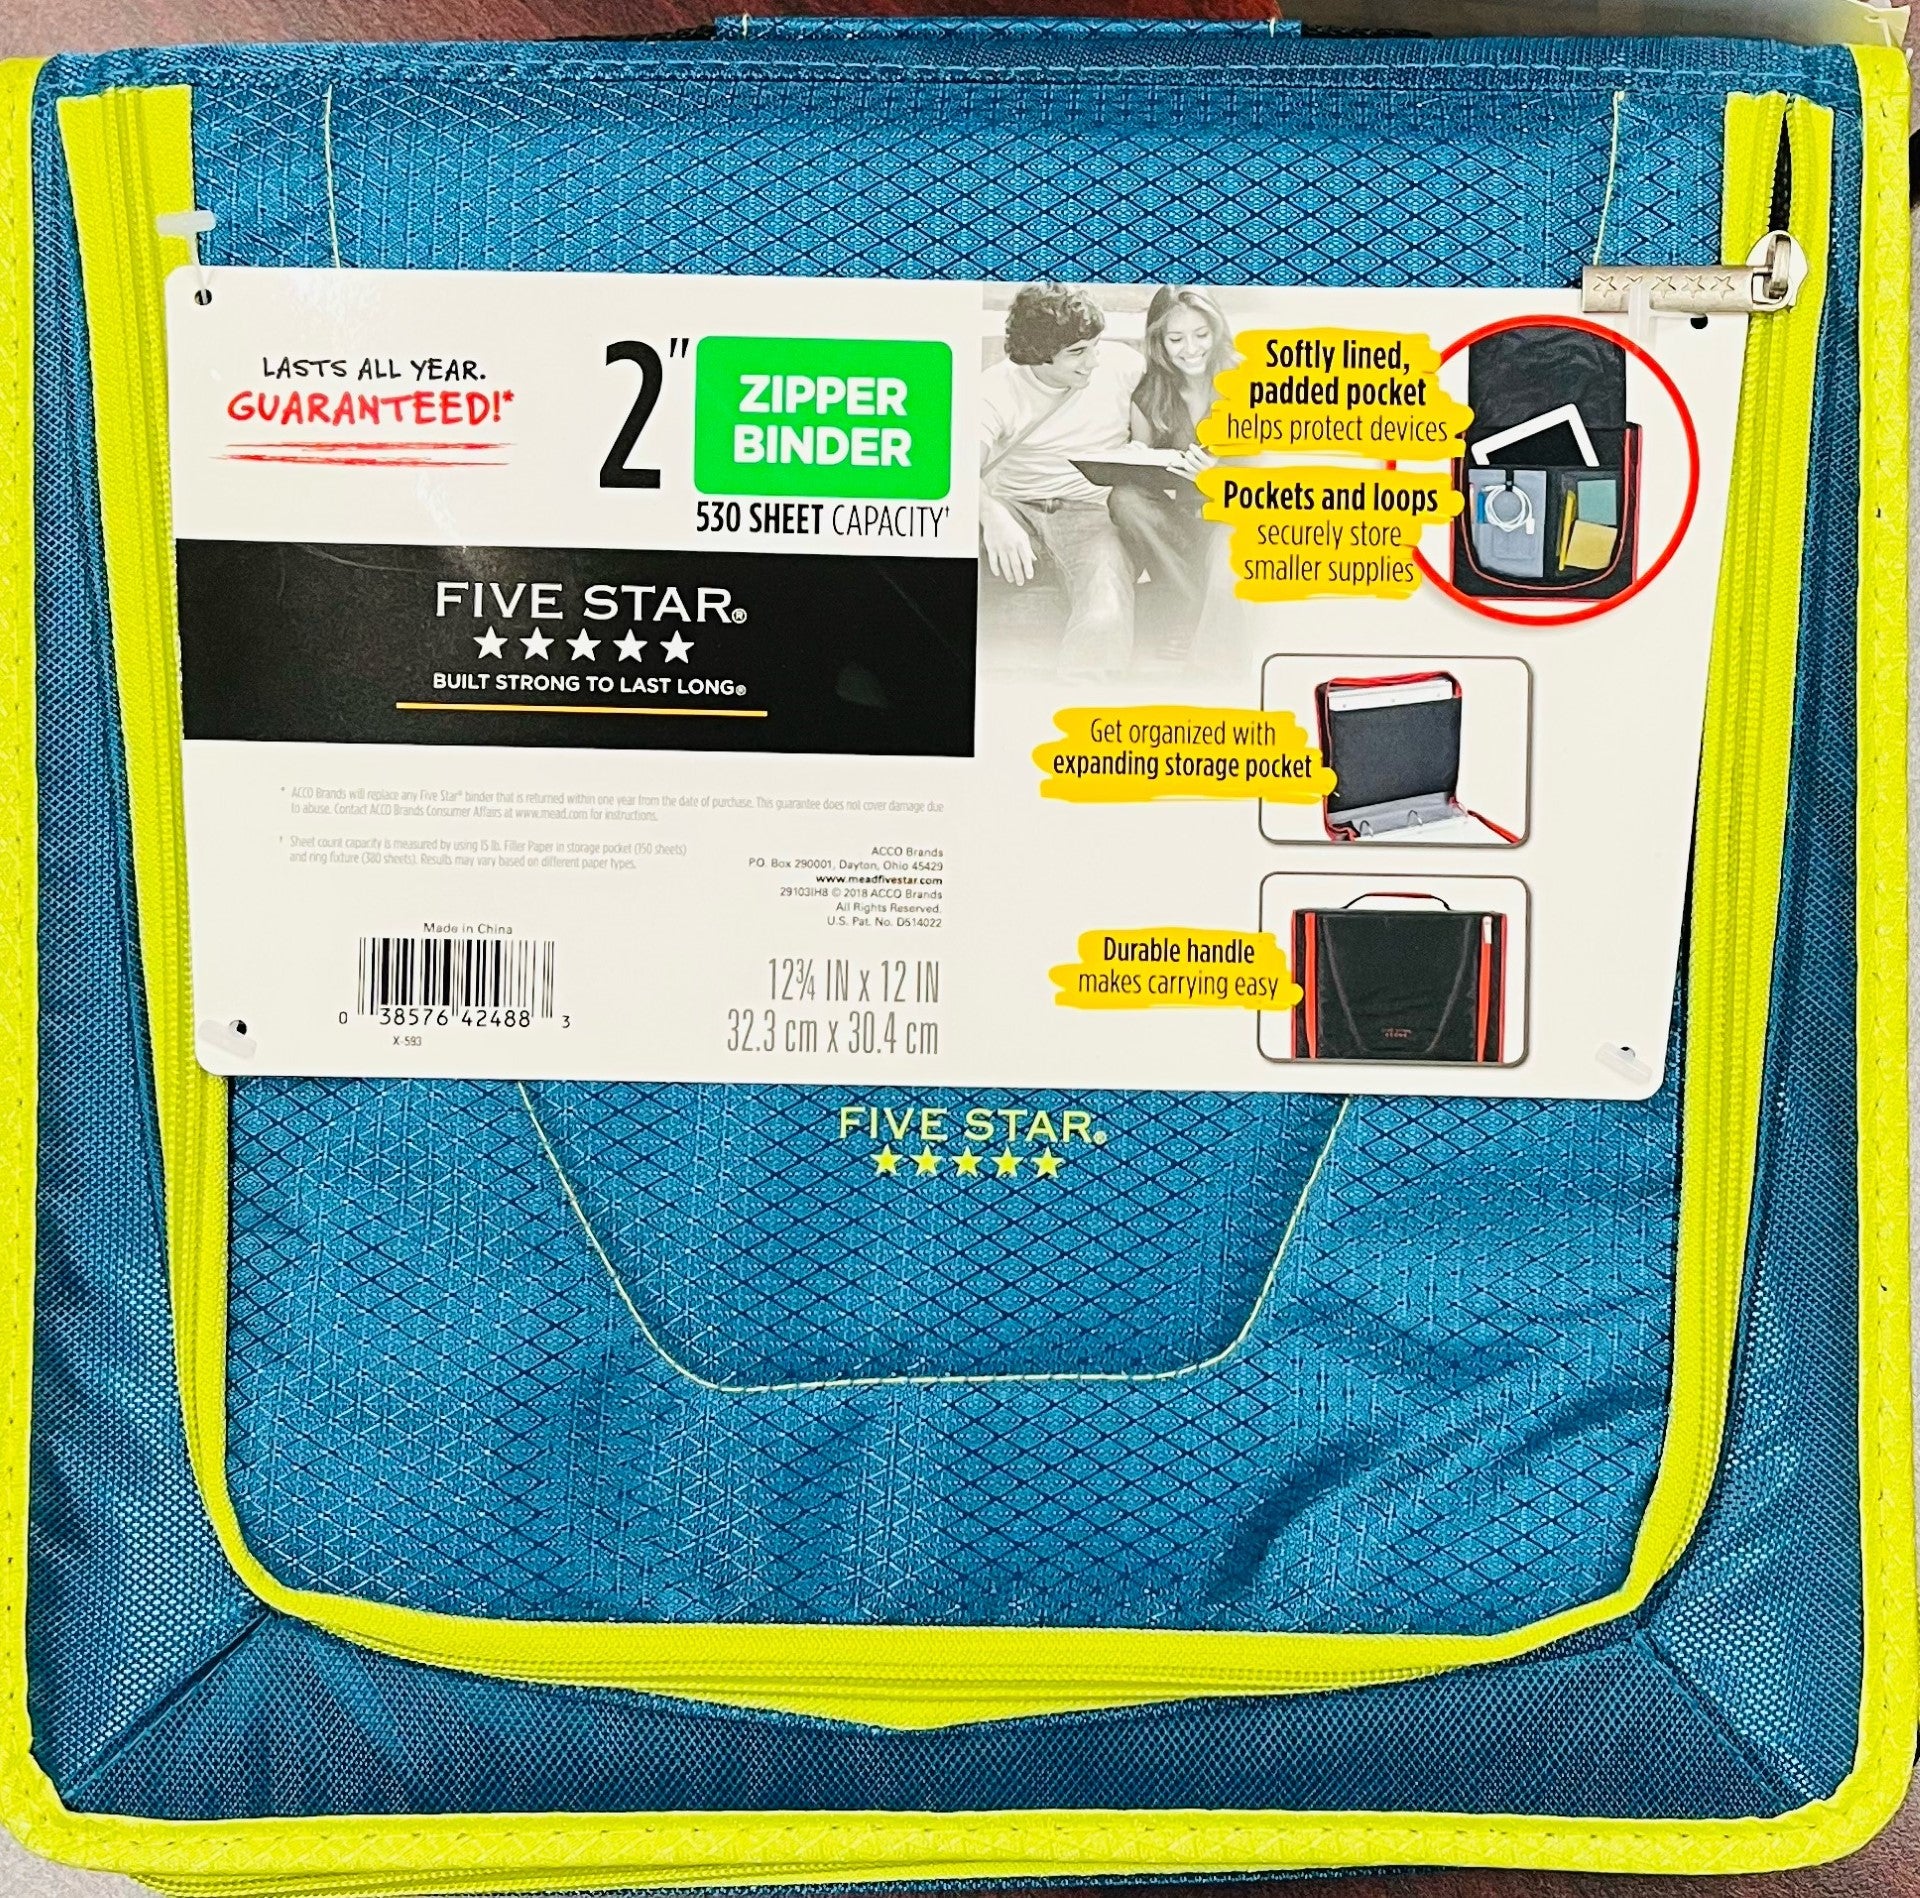 Five Star Zipper Binder 2" with 530 Sheets Capacity (Teal, Lime) - Blesket Canada